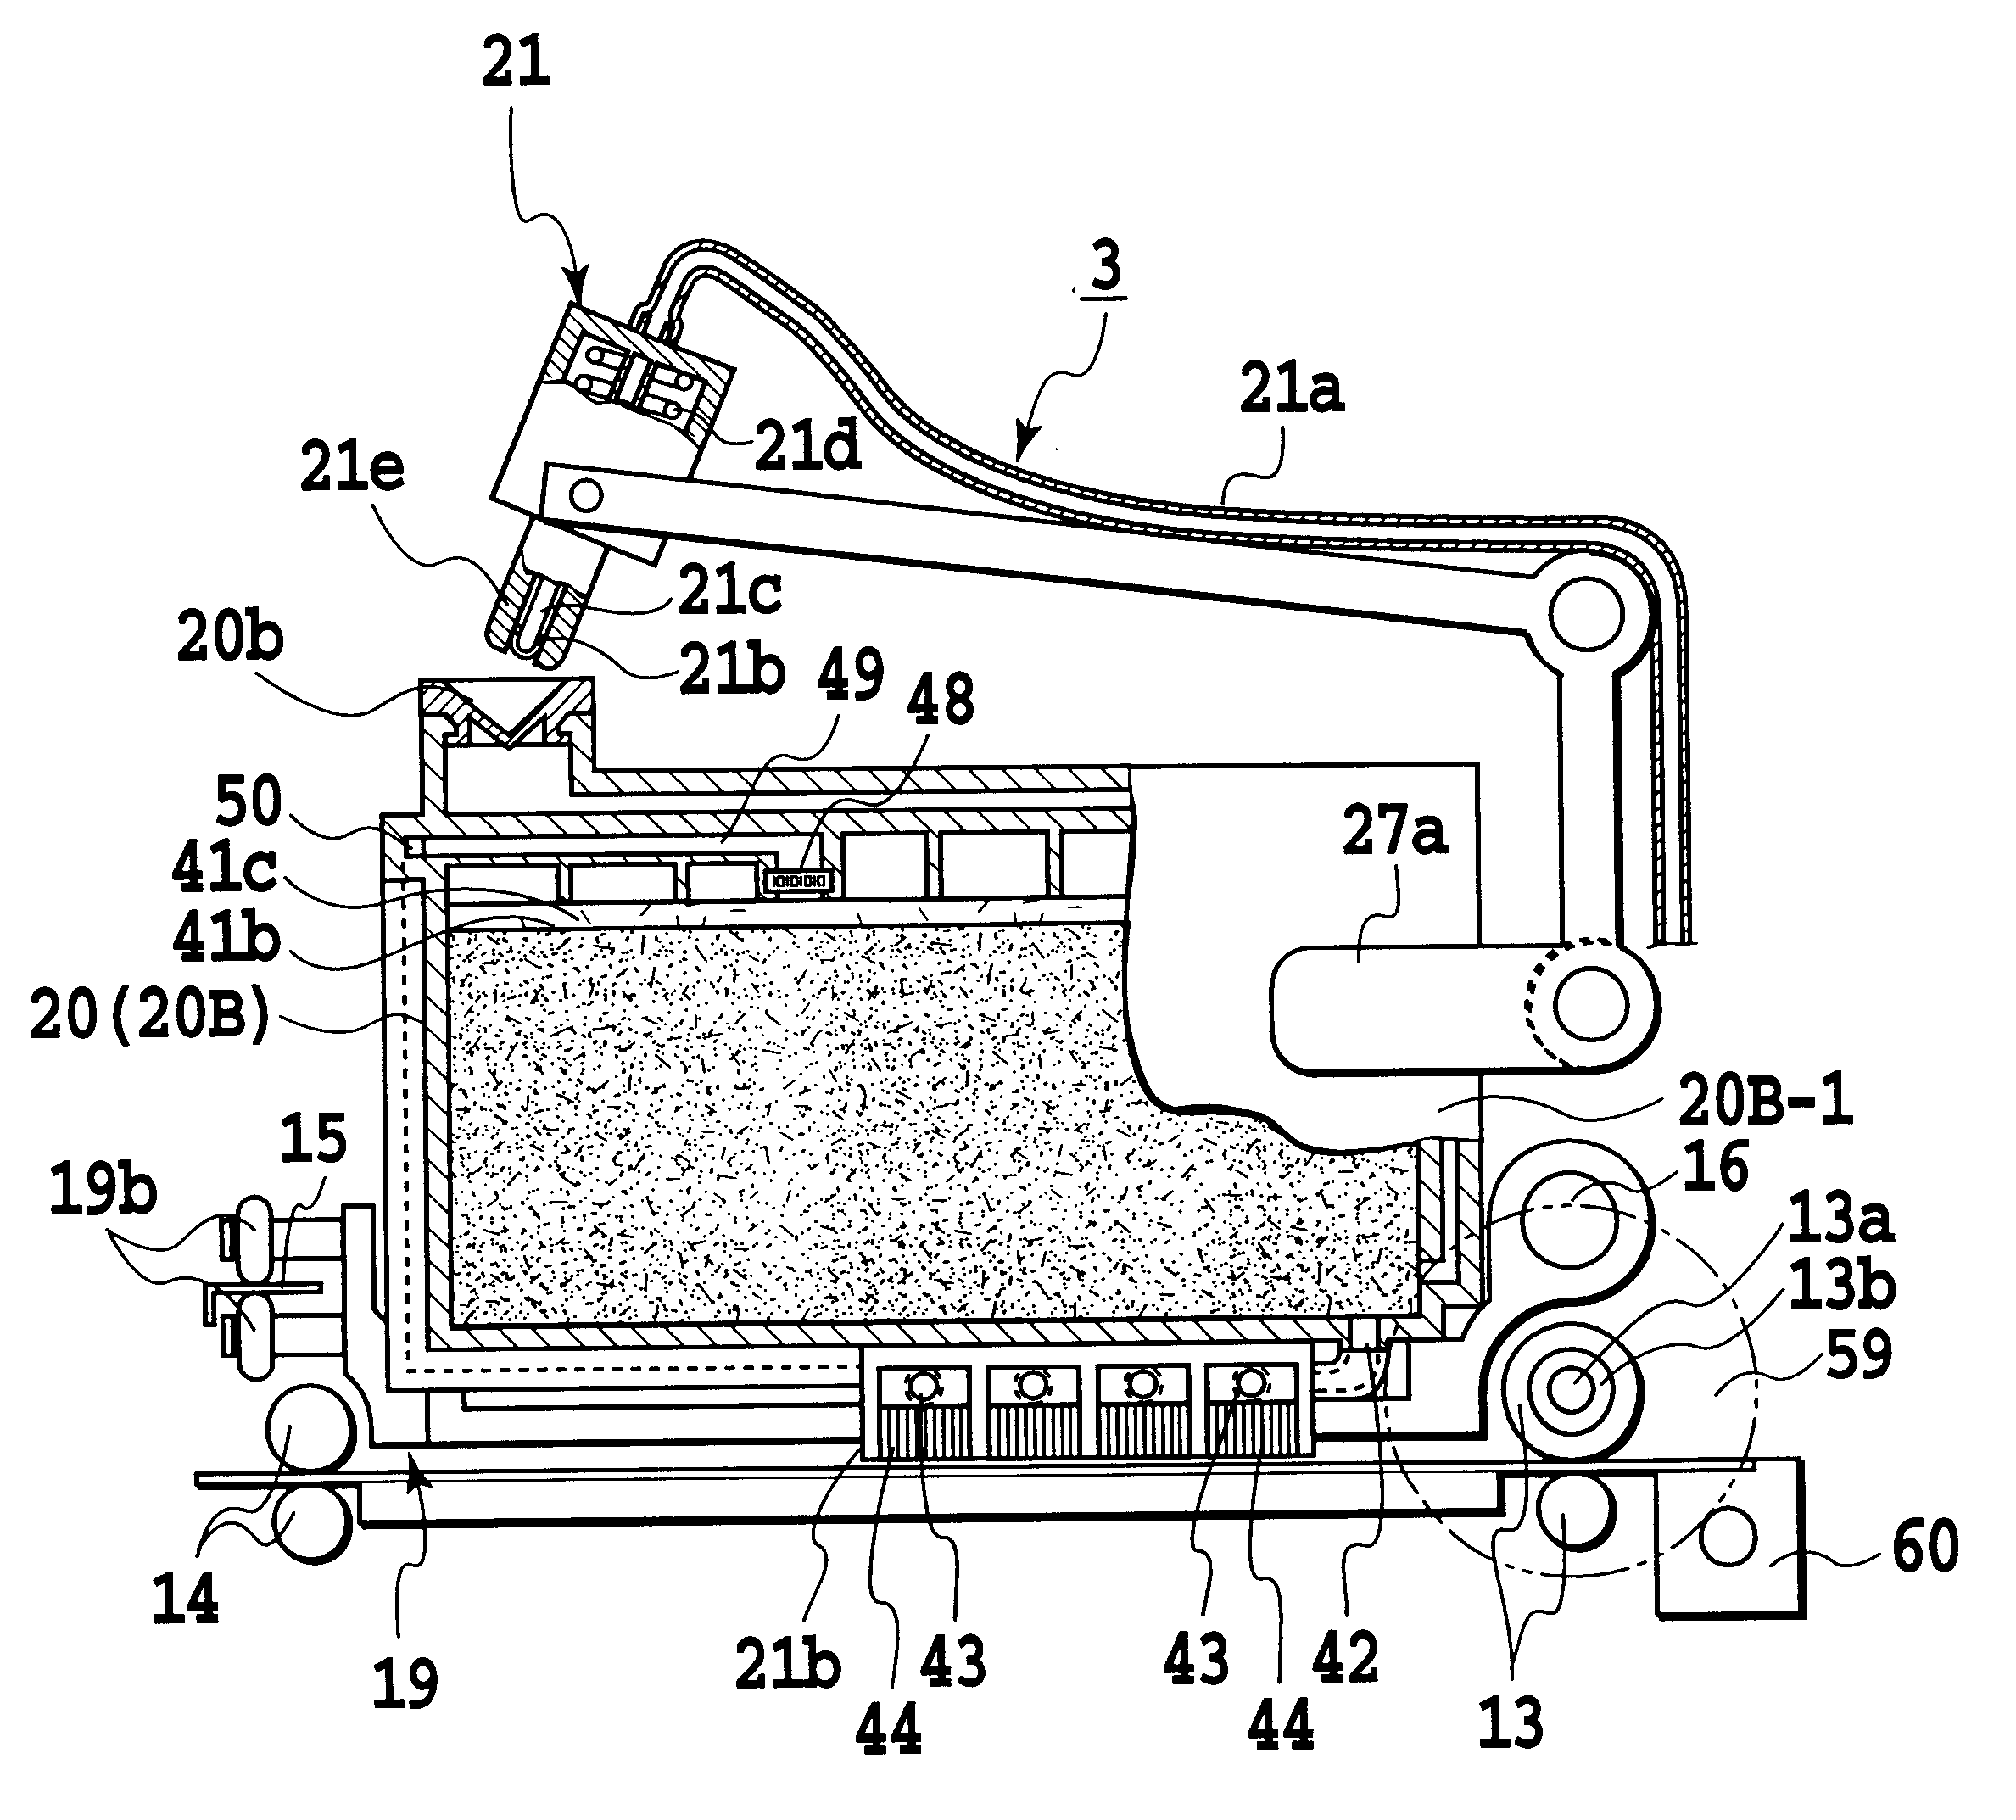 Ink tank, ink-jet cartridge, ink-supplying apparatus, ink-jet printing apparatus and method for supplying ink